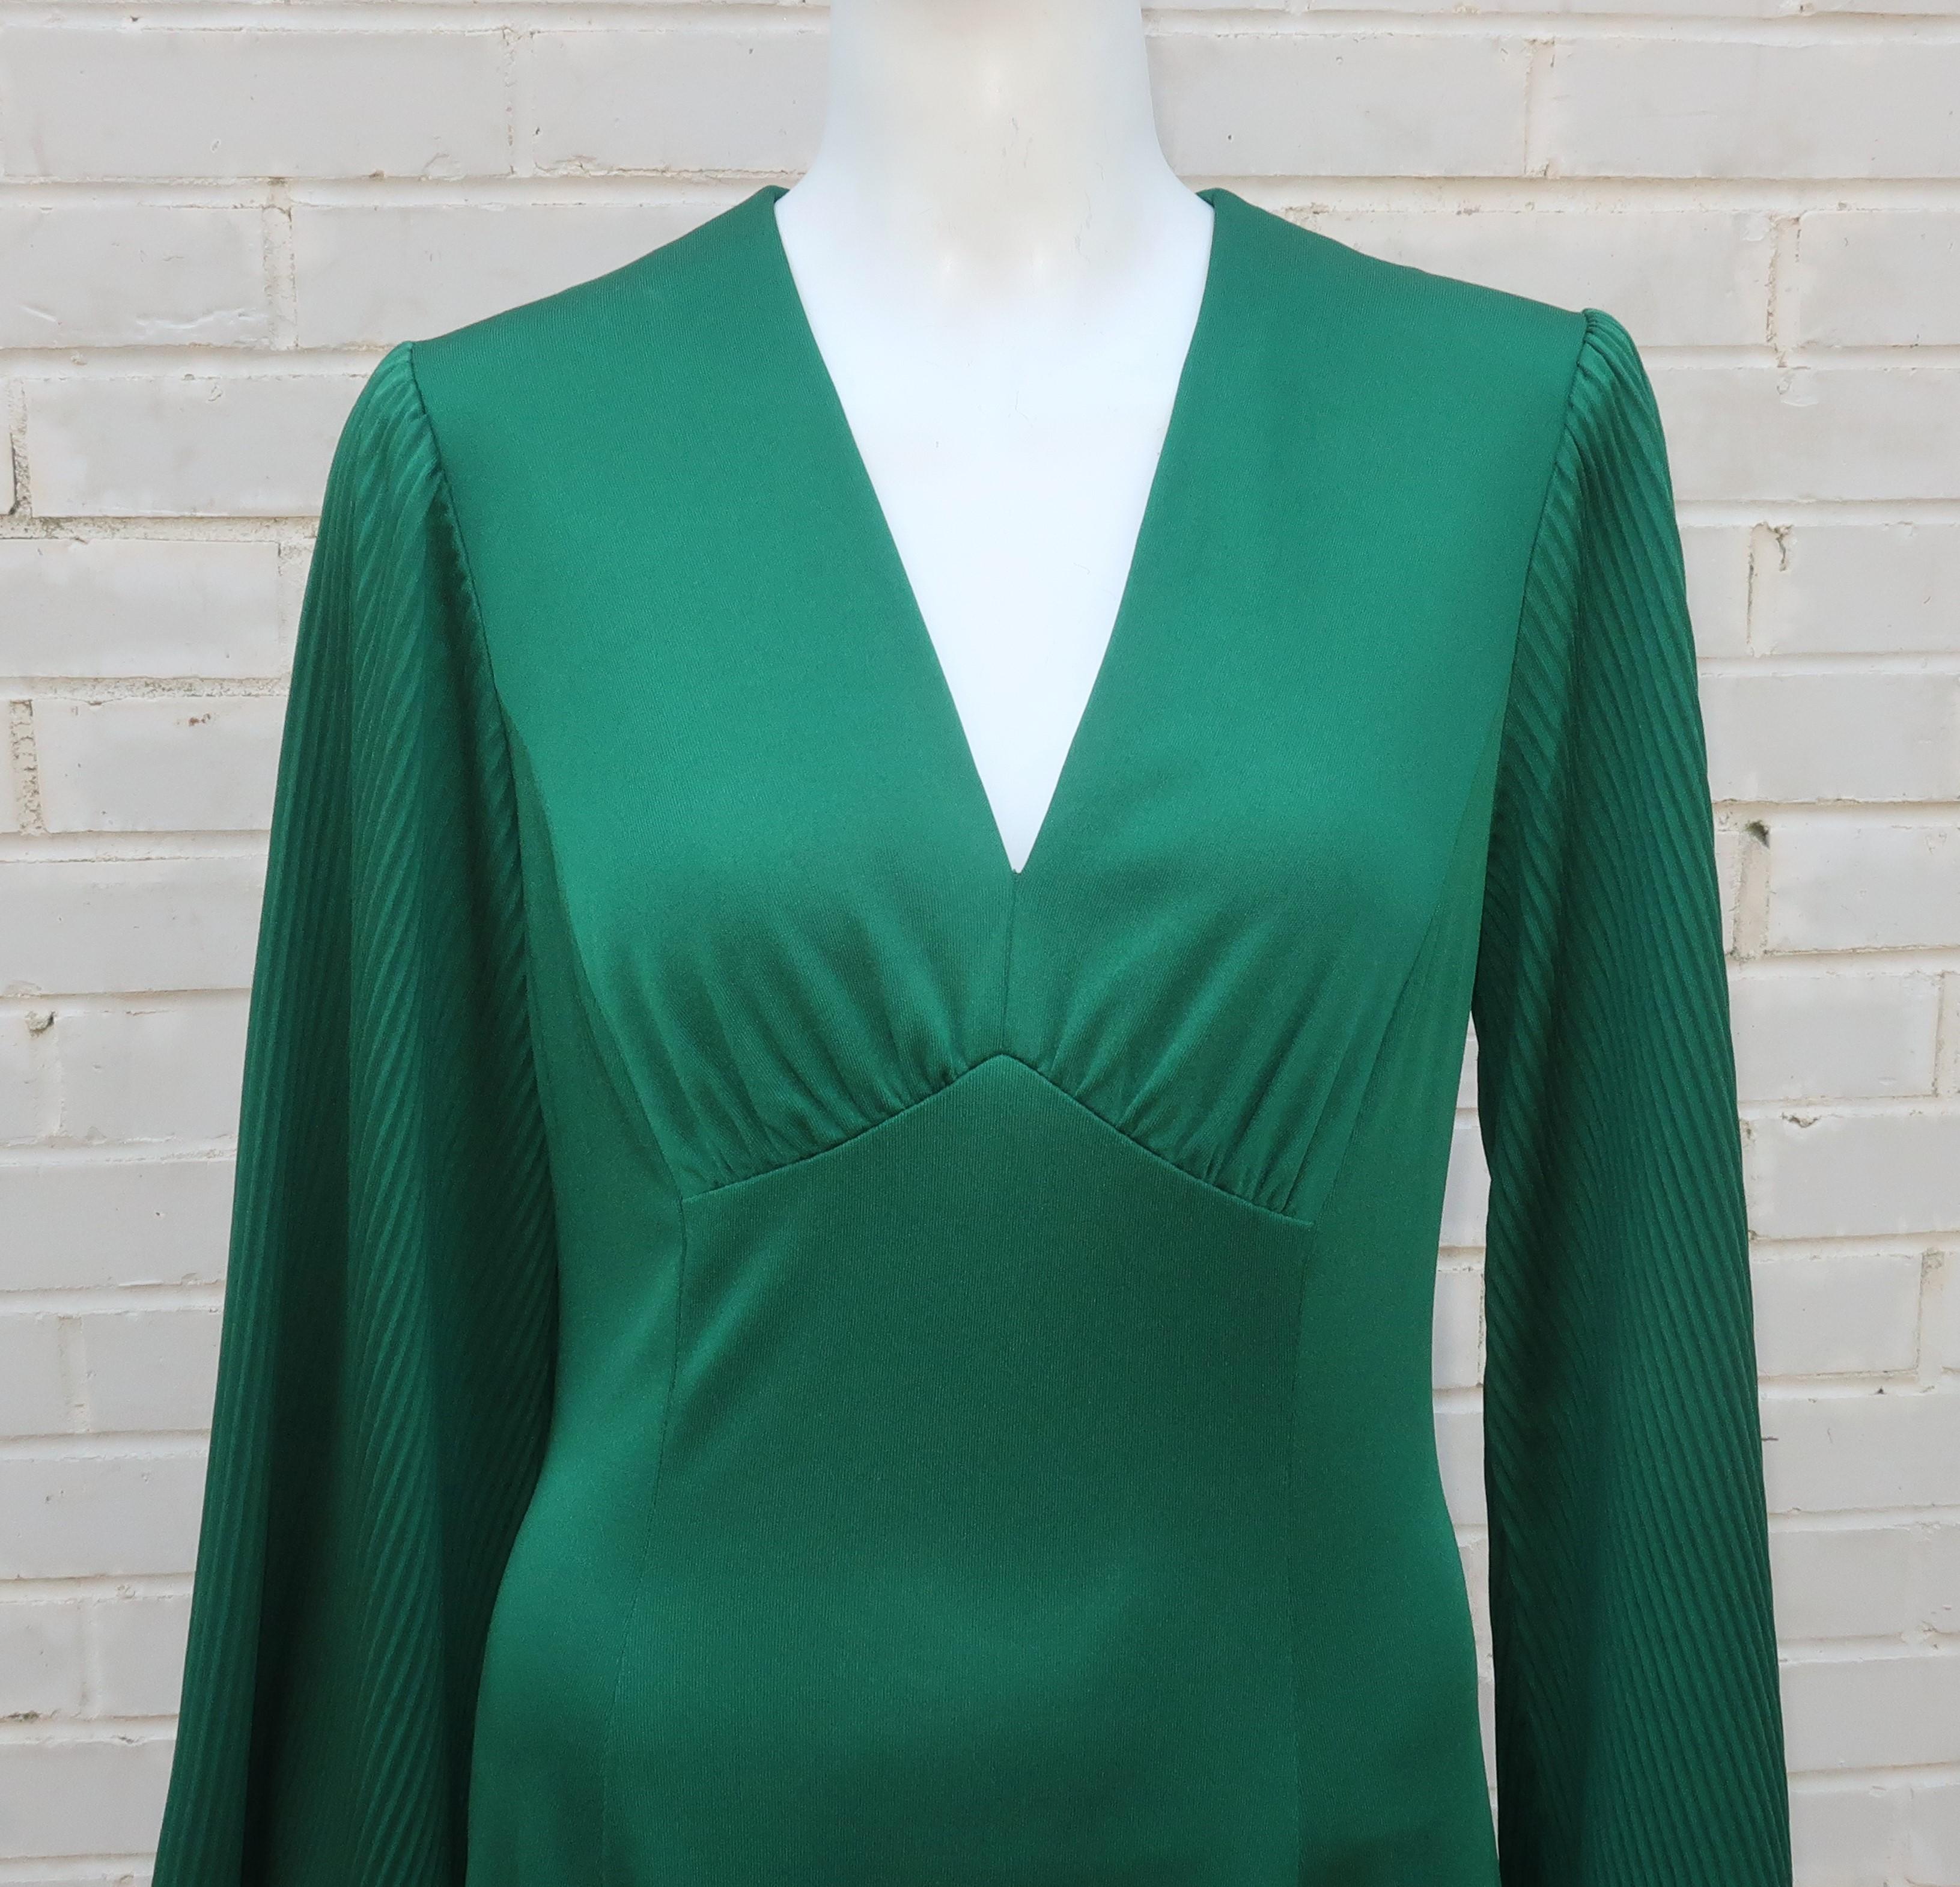 Disco diva in emerald green!  This 1970's Edith Flagg design is a period perfect look and a great cut for the dance floor.  The emerald green polyester jersey is easy to wear and the construction includes ruched detail at the bust and micro pleated